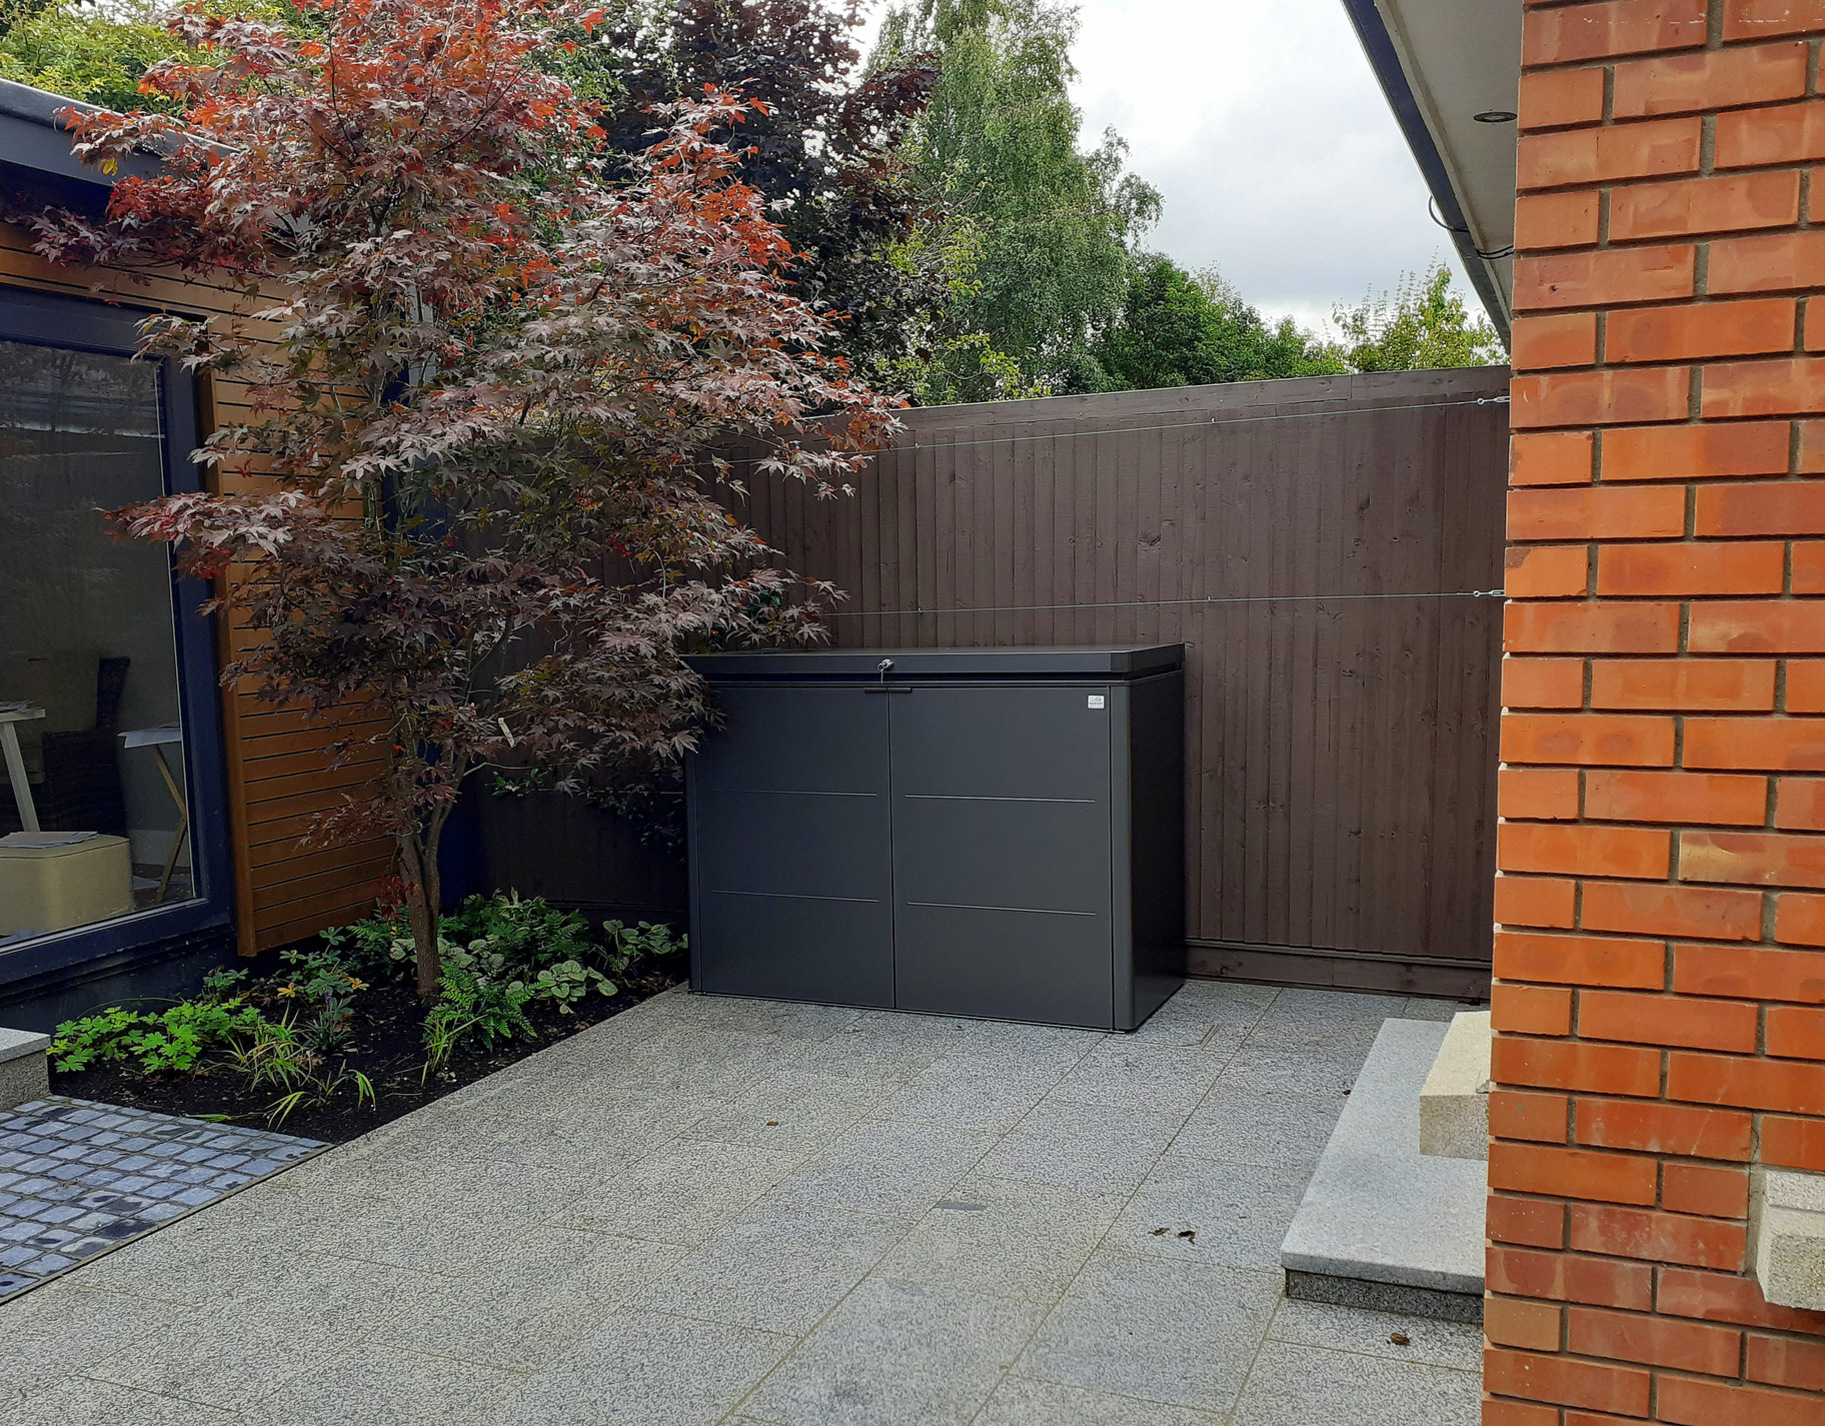 Biohort HighBoard 160 Garden Storage Unit in metallic dark grey fitted with optional intermediate shelving, supplied & fitted in Castleknock, Dublin 15   | Owen Chubb Ireland's Leading supplier of Biohort Garden Sheds & Storage Solutions | FREE Fitting in Dublin